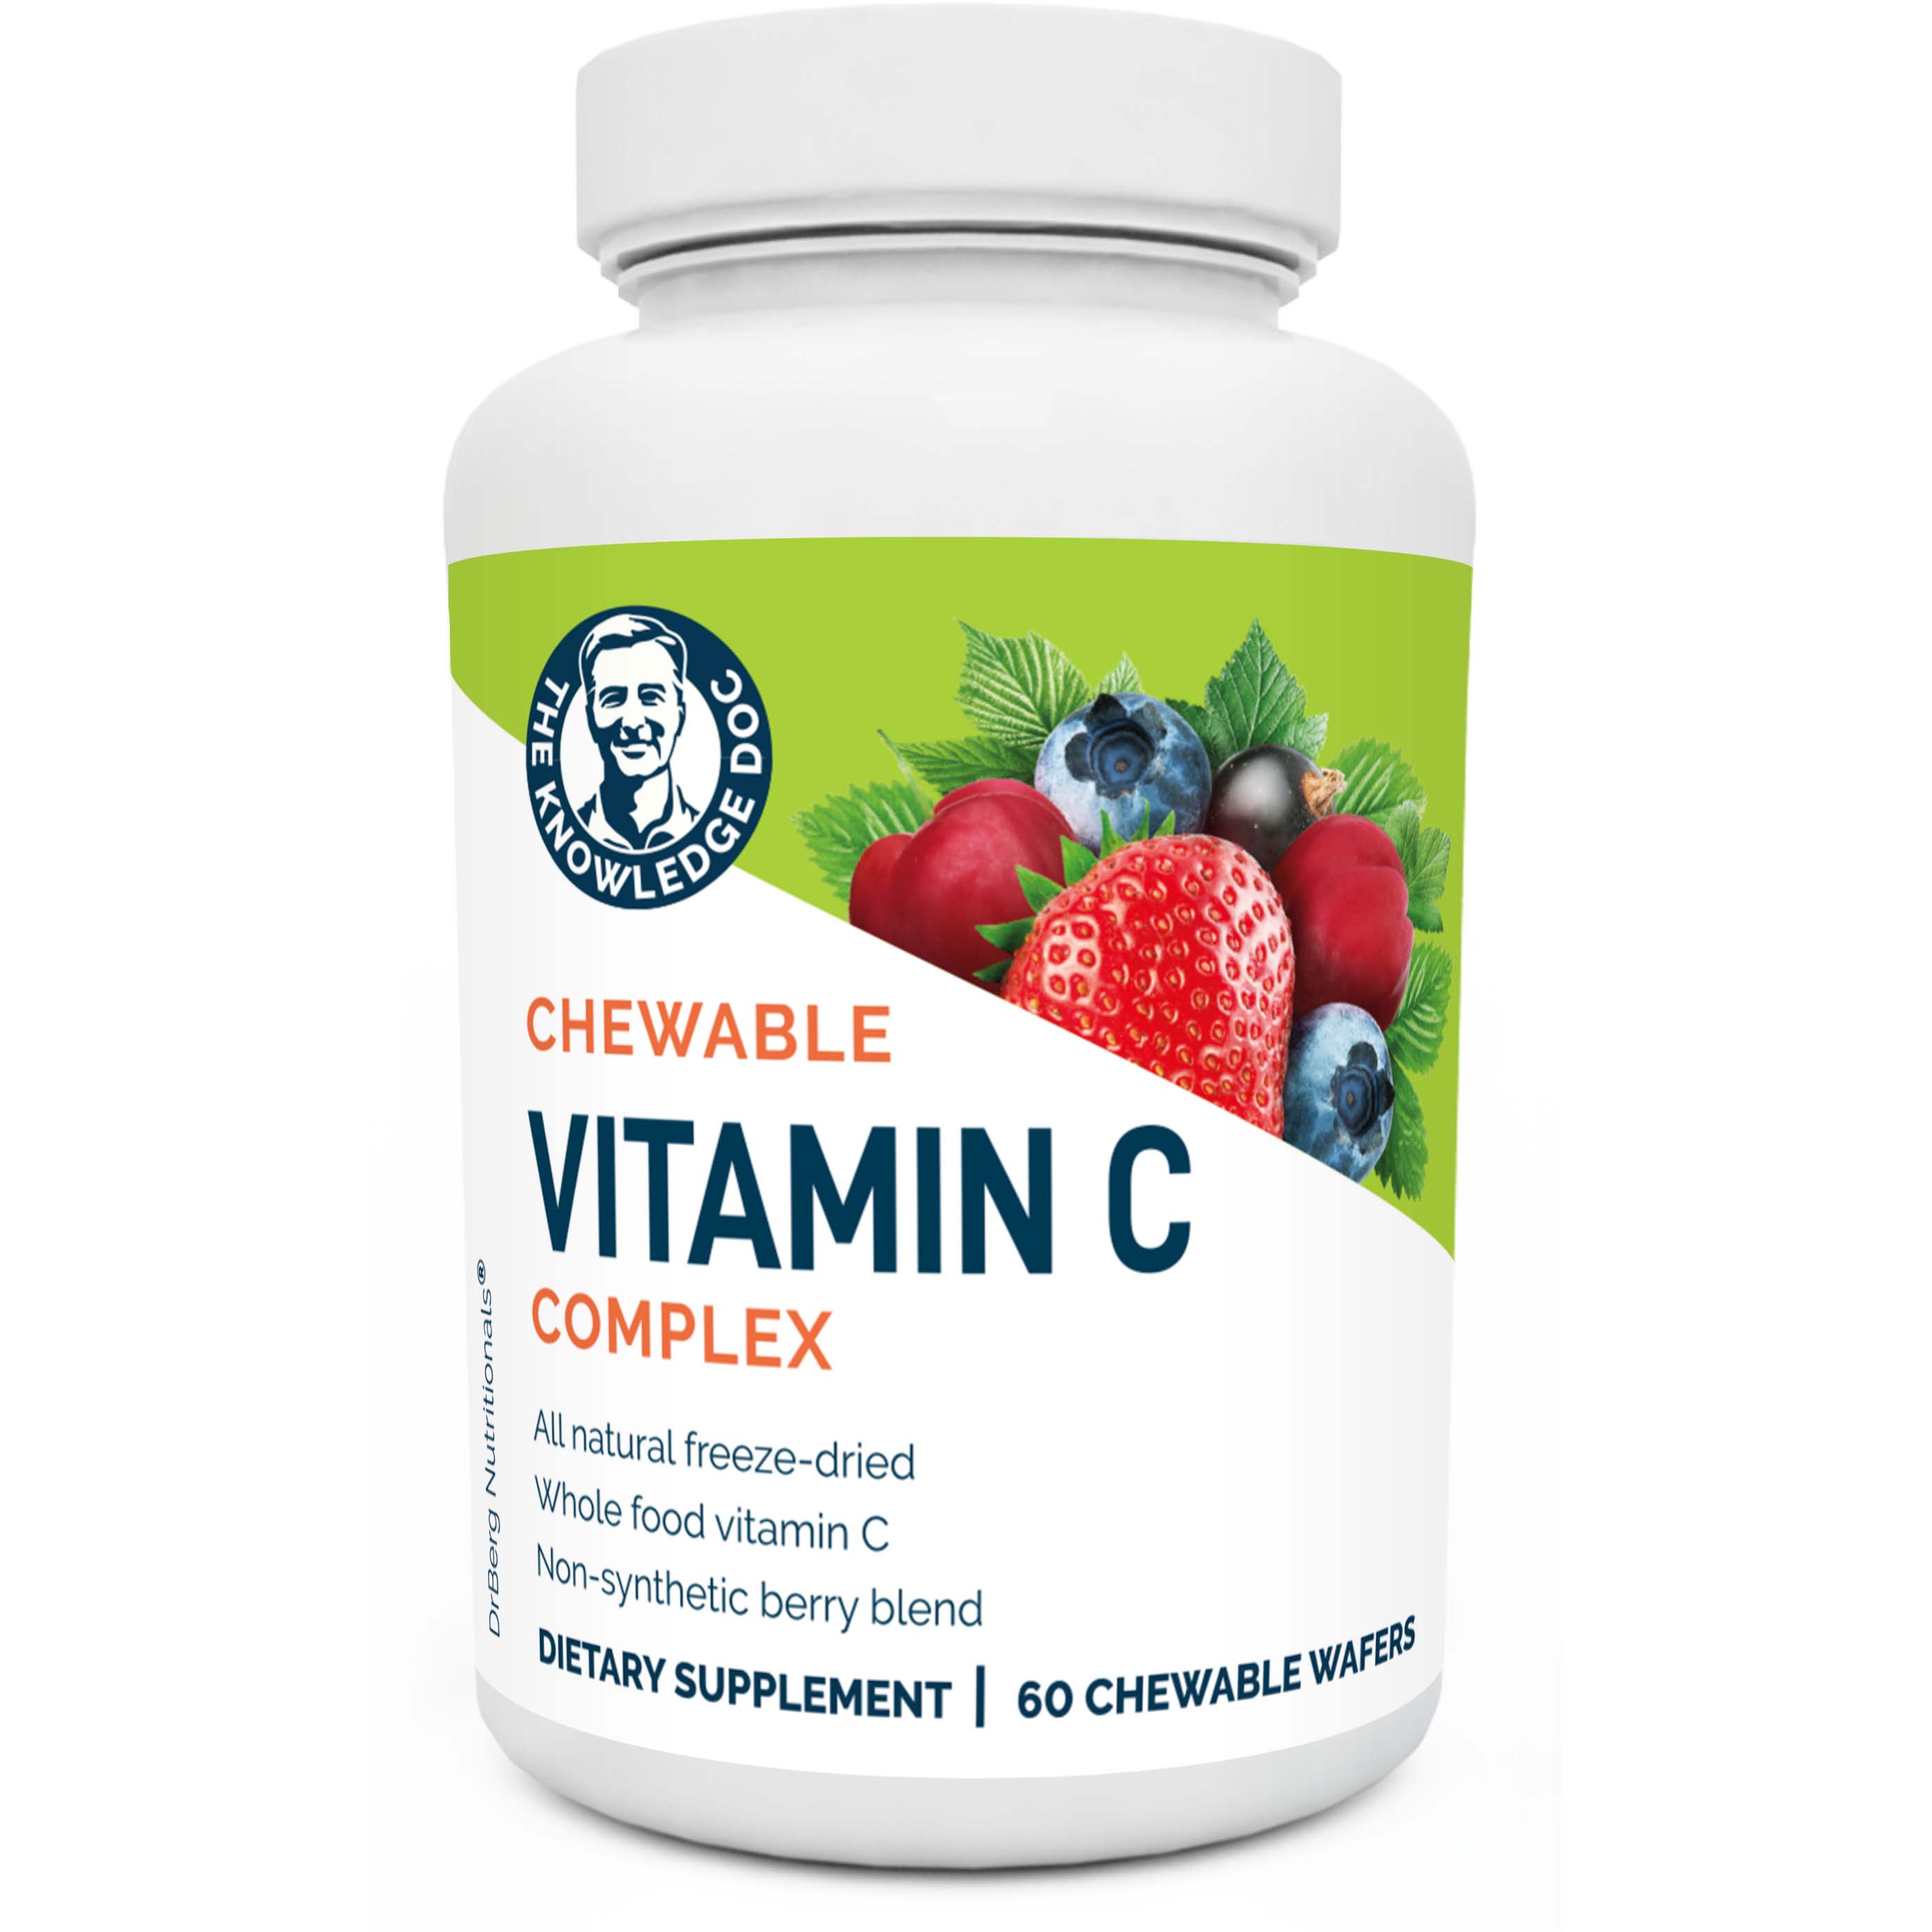 Dr.Berg Chewable Vitamin C Complex, 60 Chewable Wafers